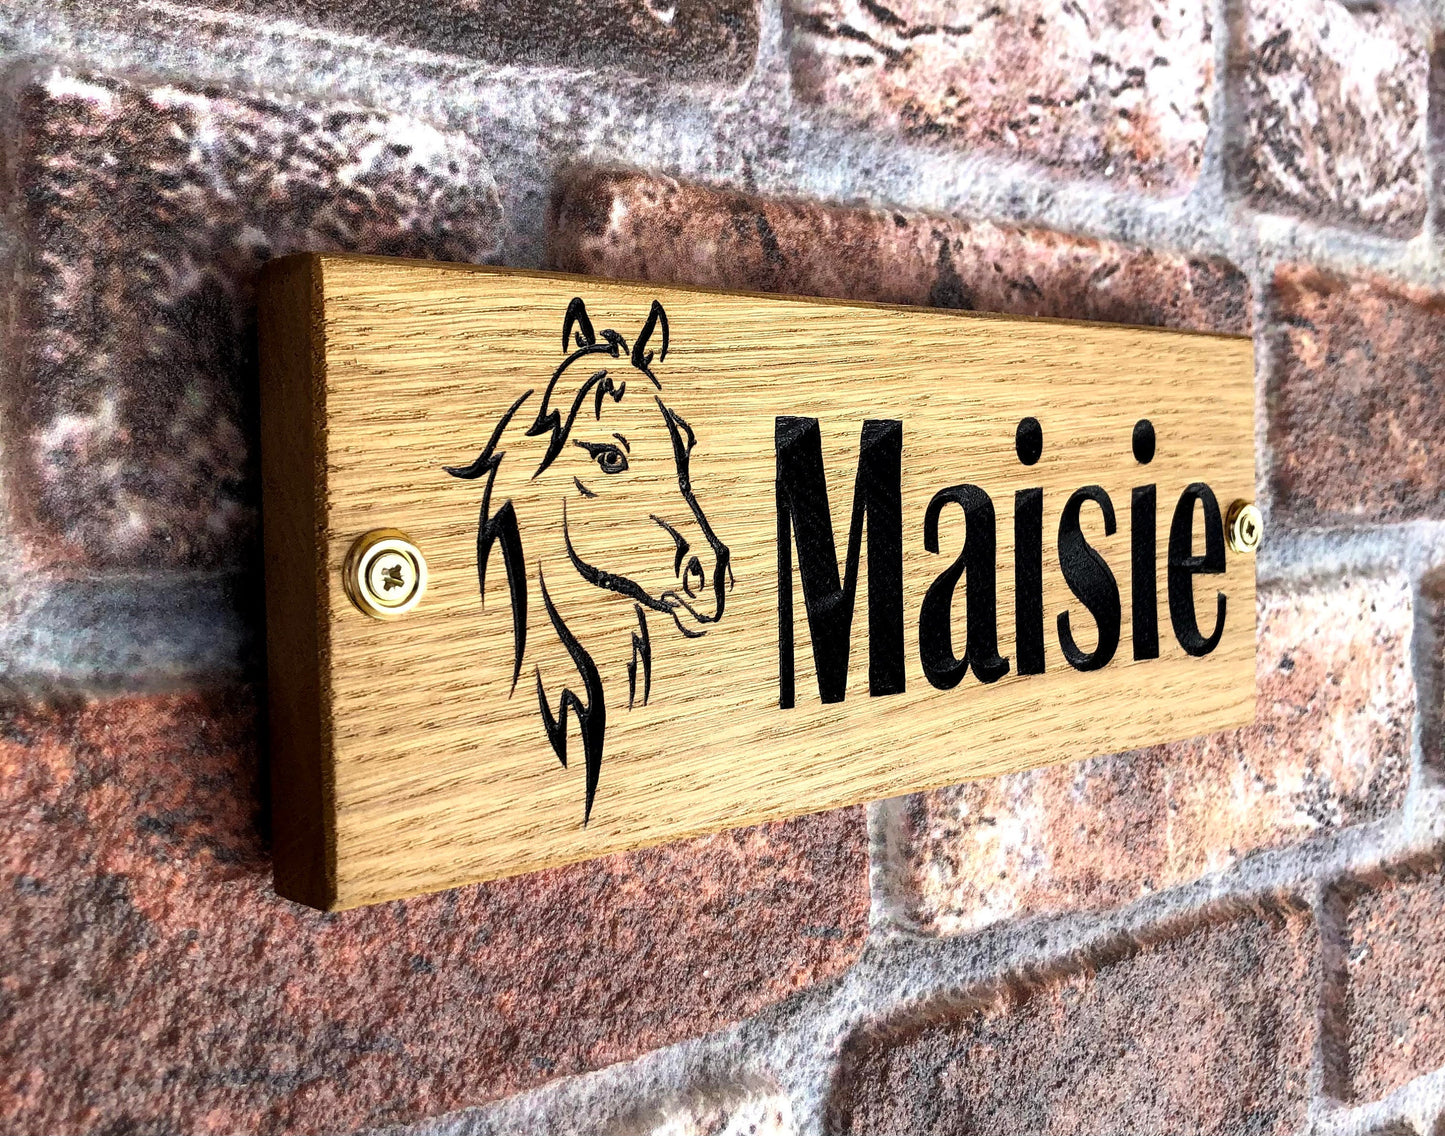 Personalised Horse Stable/Stall Name Sign - with Horse Head - Britannic Bold - OAK